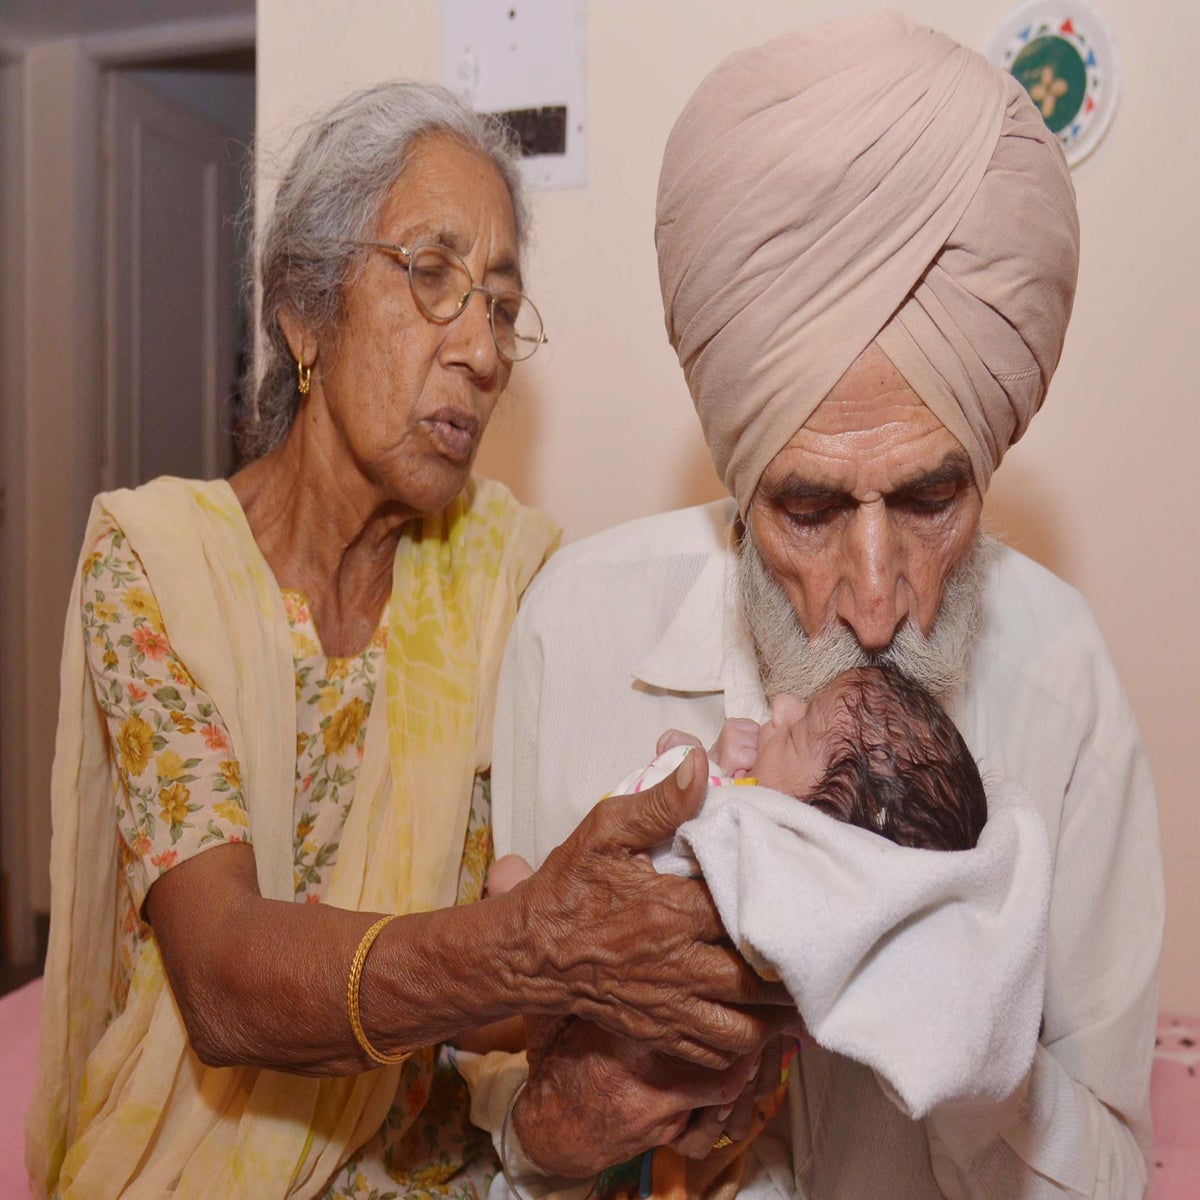 Indian Woman Dilivery Of Baby Xxx - Indian woman who had baby at 72 says she has no regrets - but being a  mother is harder than she expected | The Independent | The Independent